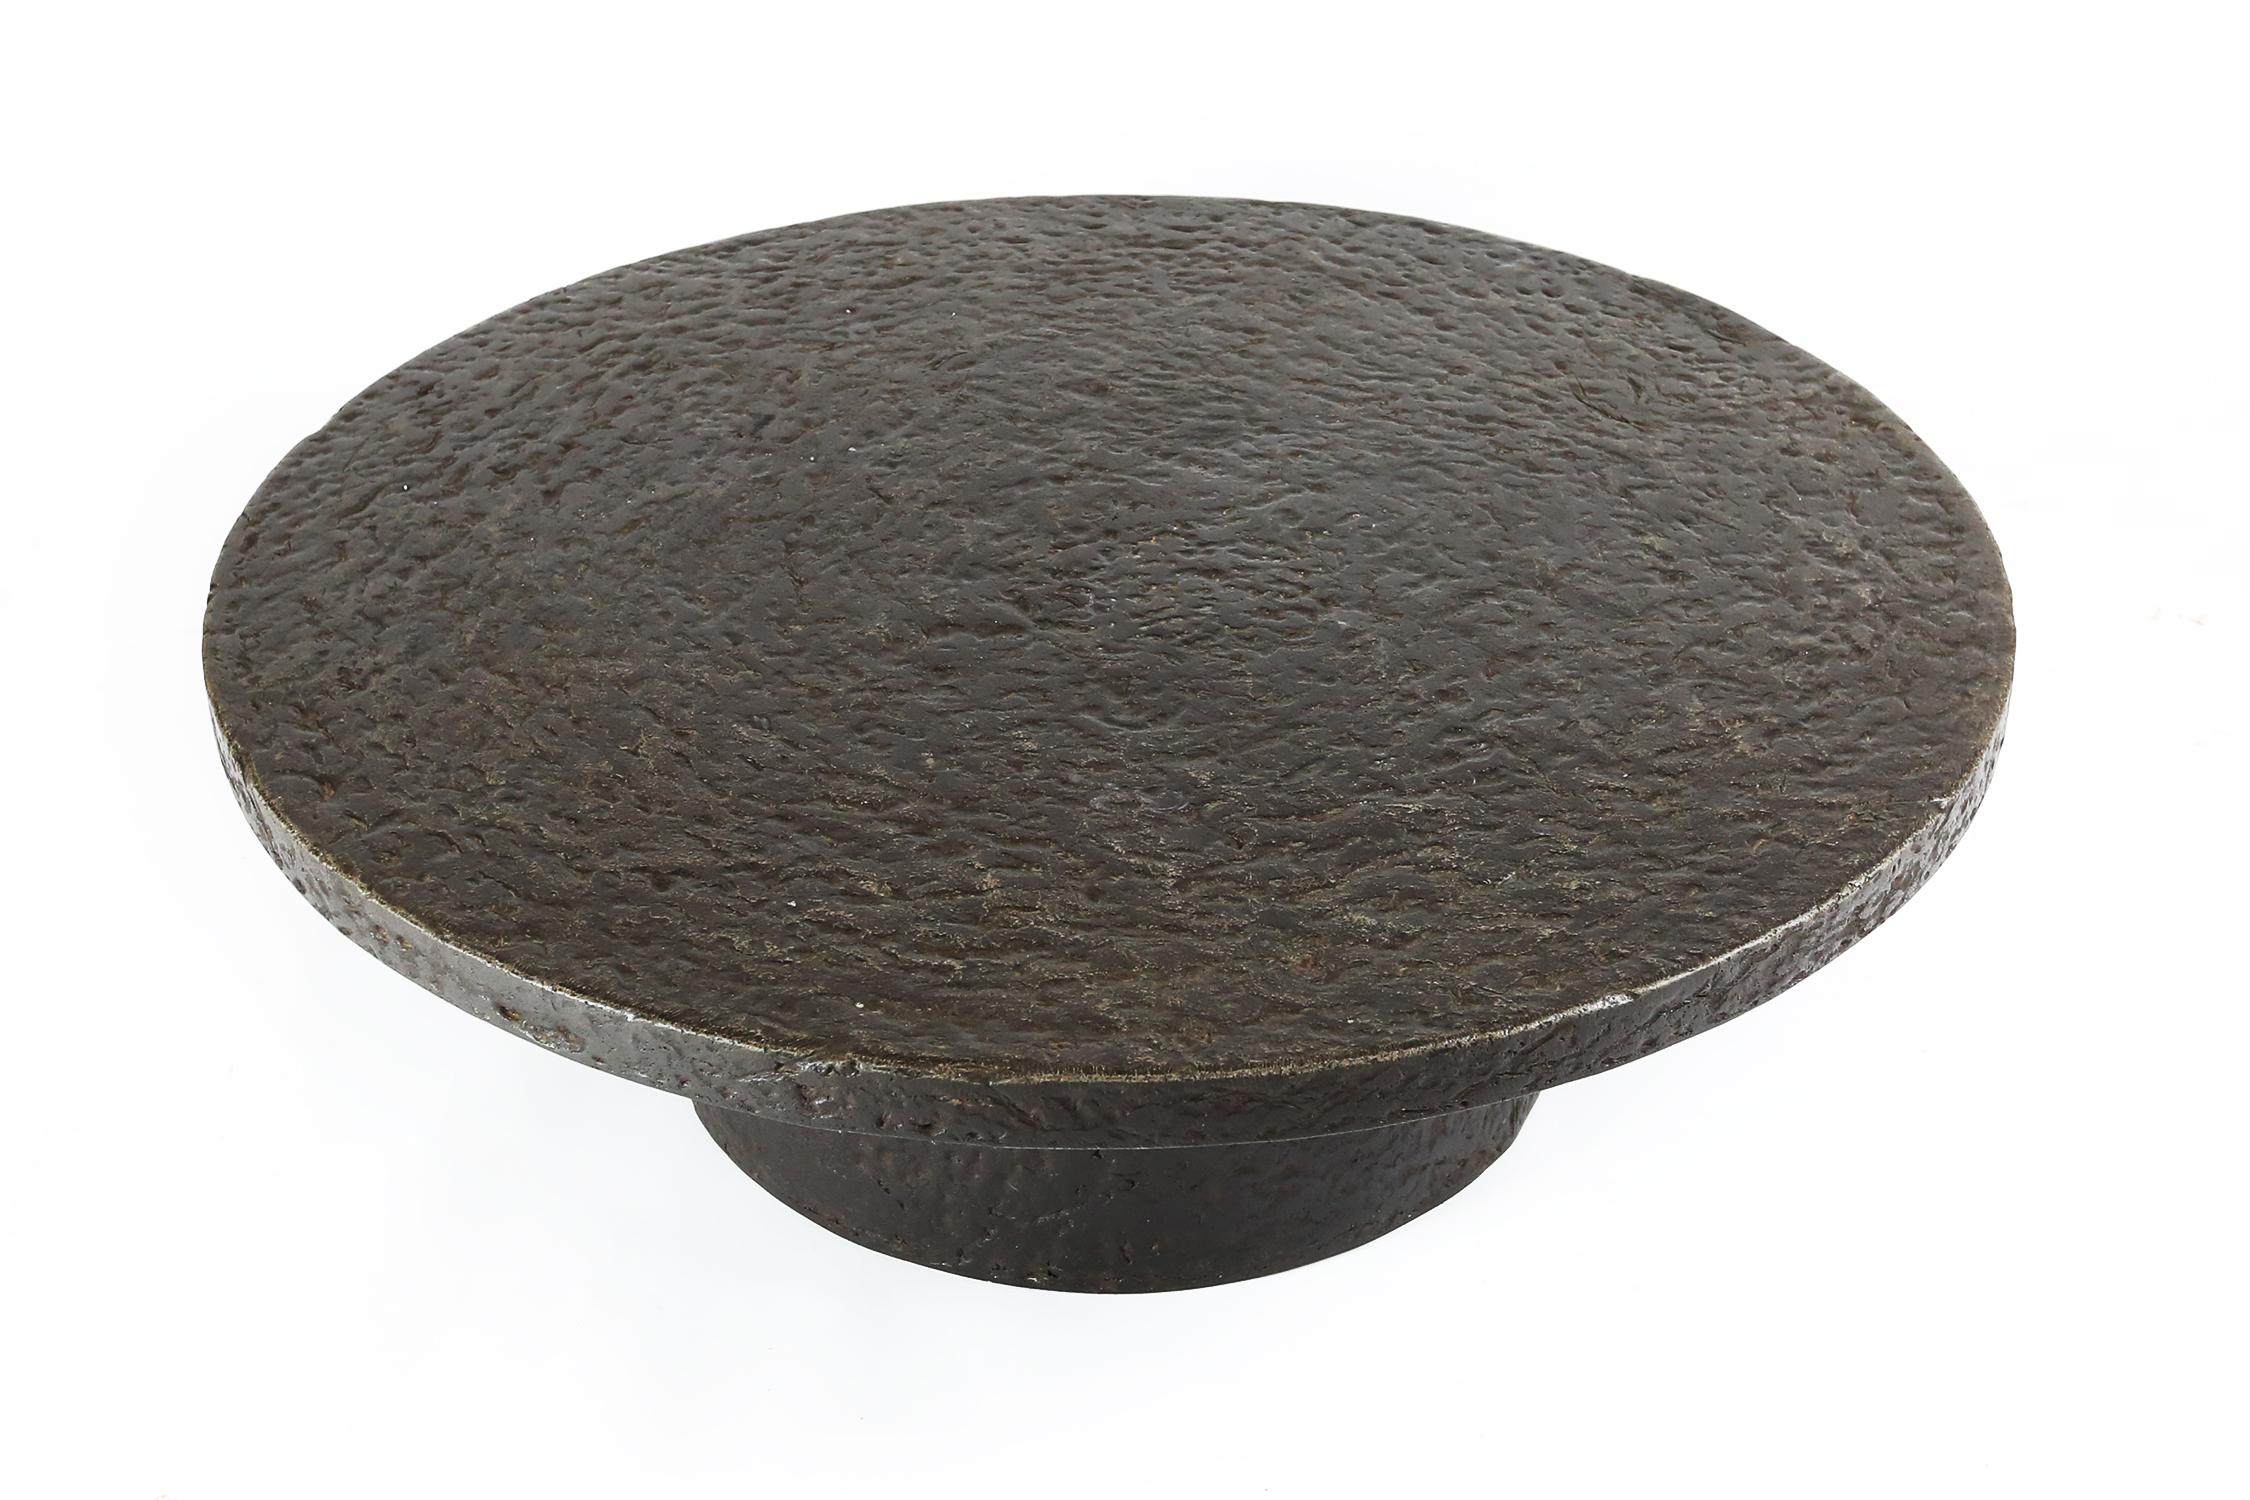 This robust coffee or cocktail table is from the 1970s and probably made in Belgium. The thick round top is supported by a similar but smaller round column. This low table is made out of resin which resembles the appearance of stone. The